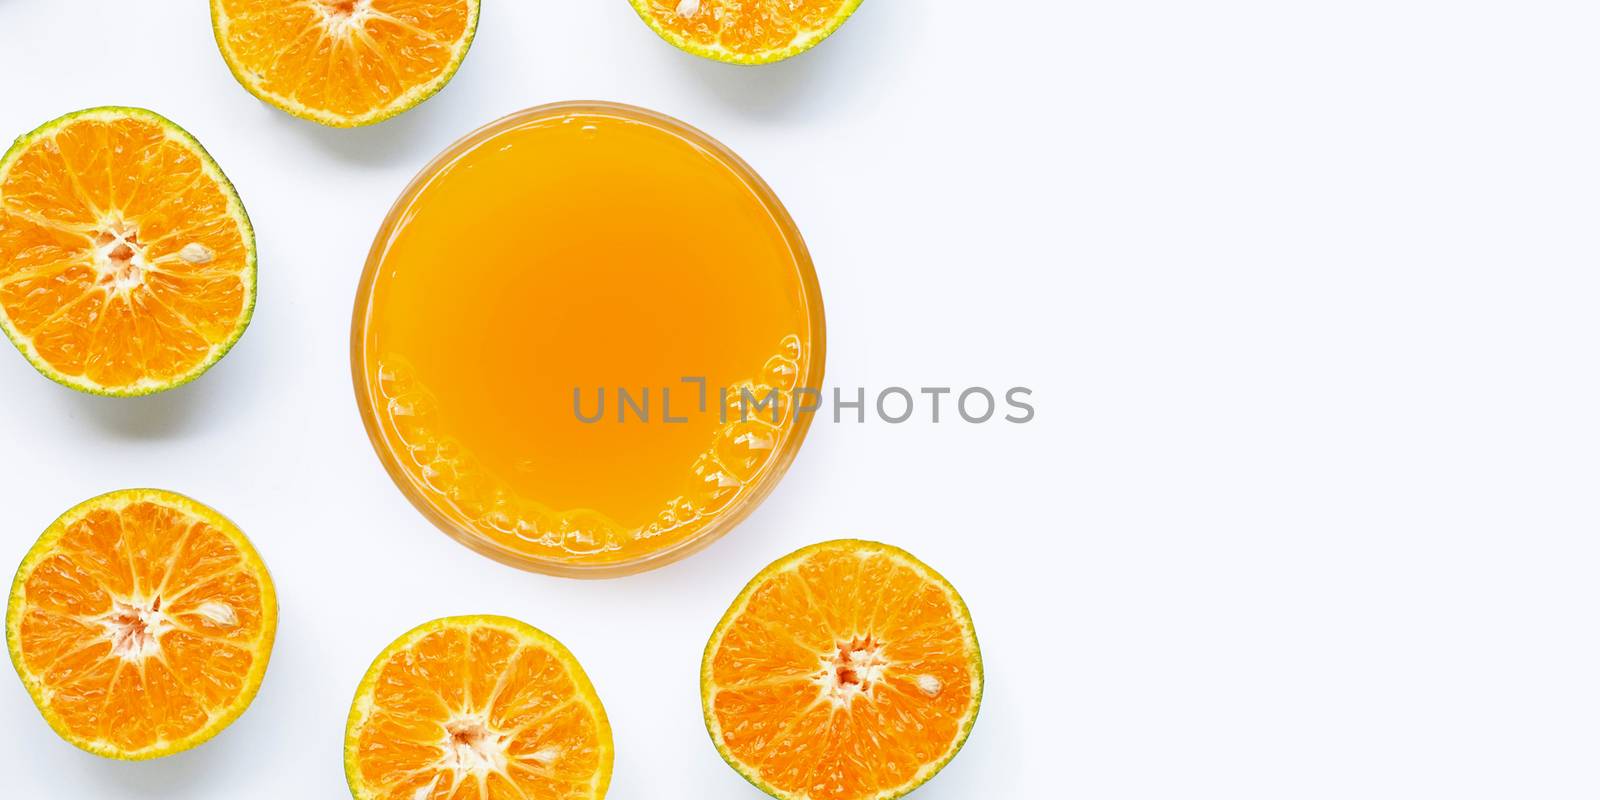 Glass of fresh orange juice on white background. Top view with copy space